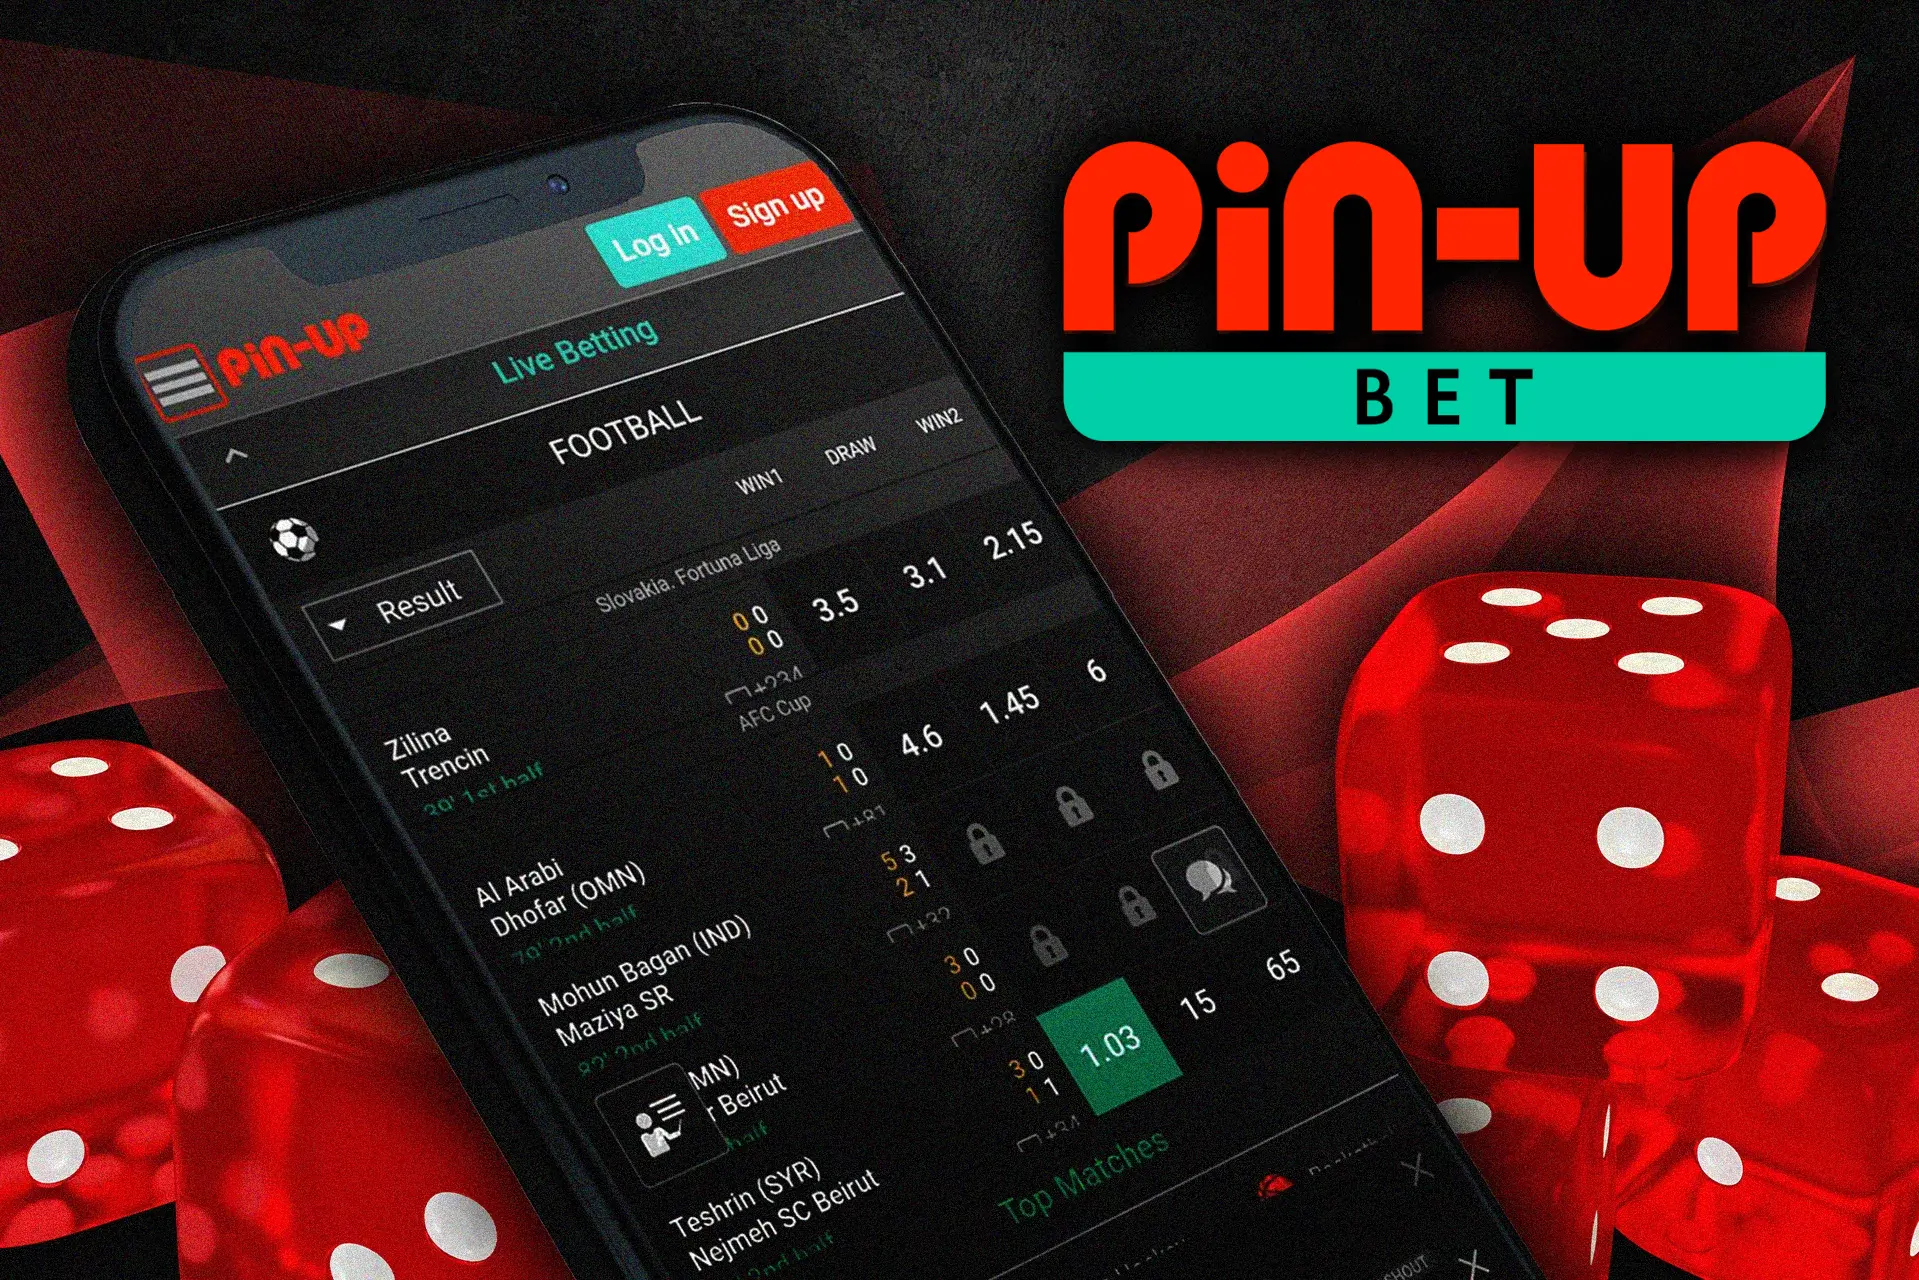 Place simple bets, as well as system and express bets in the app.